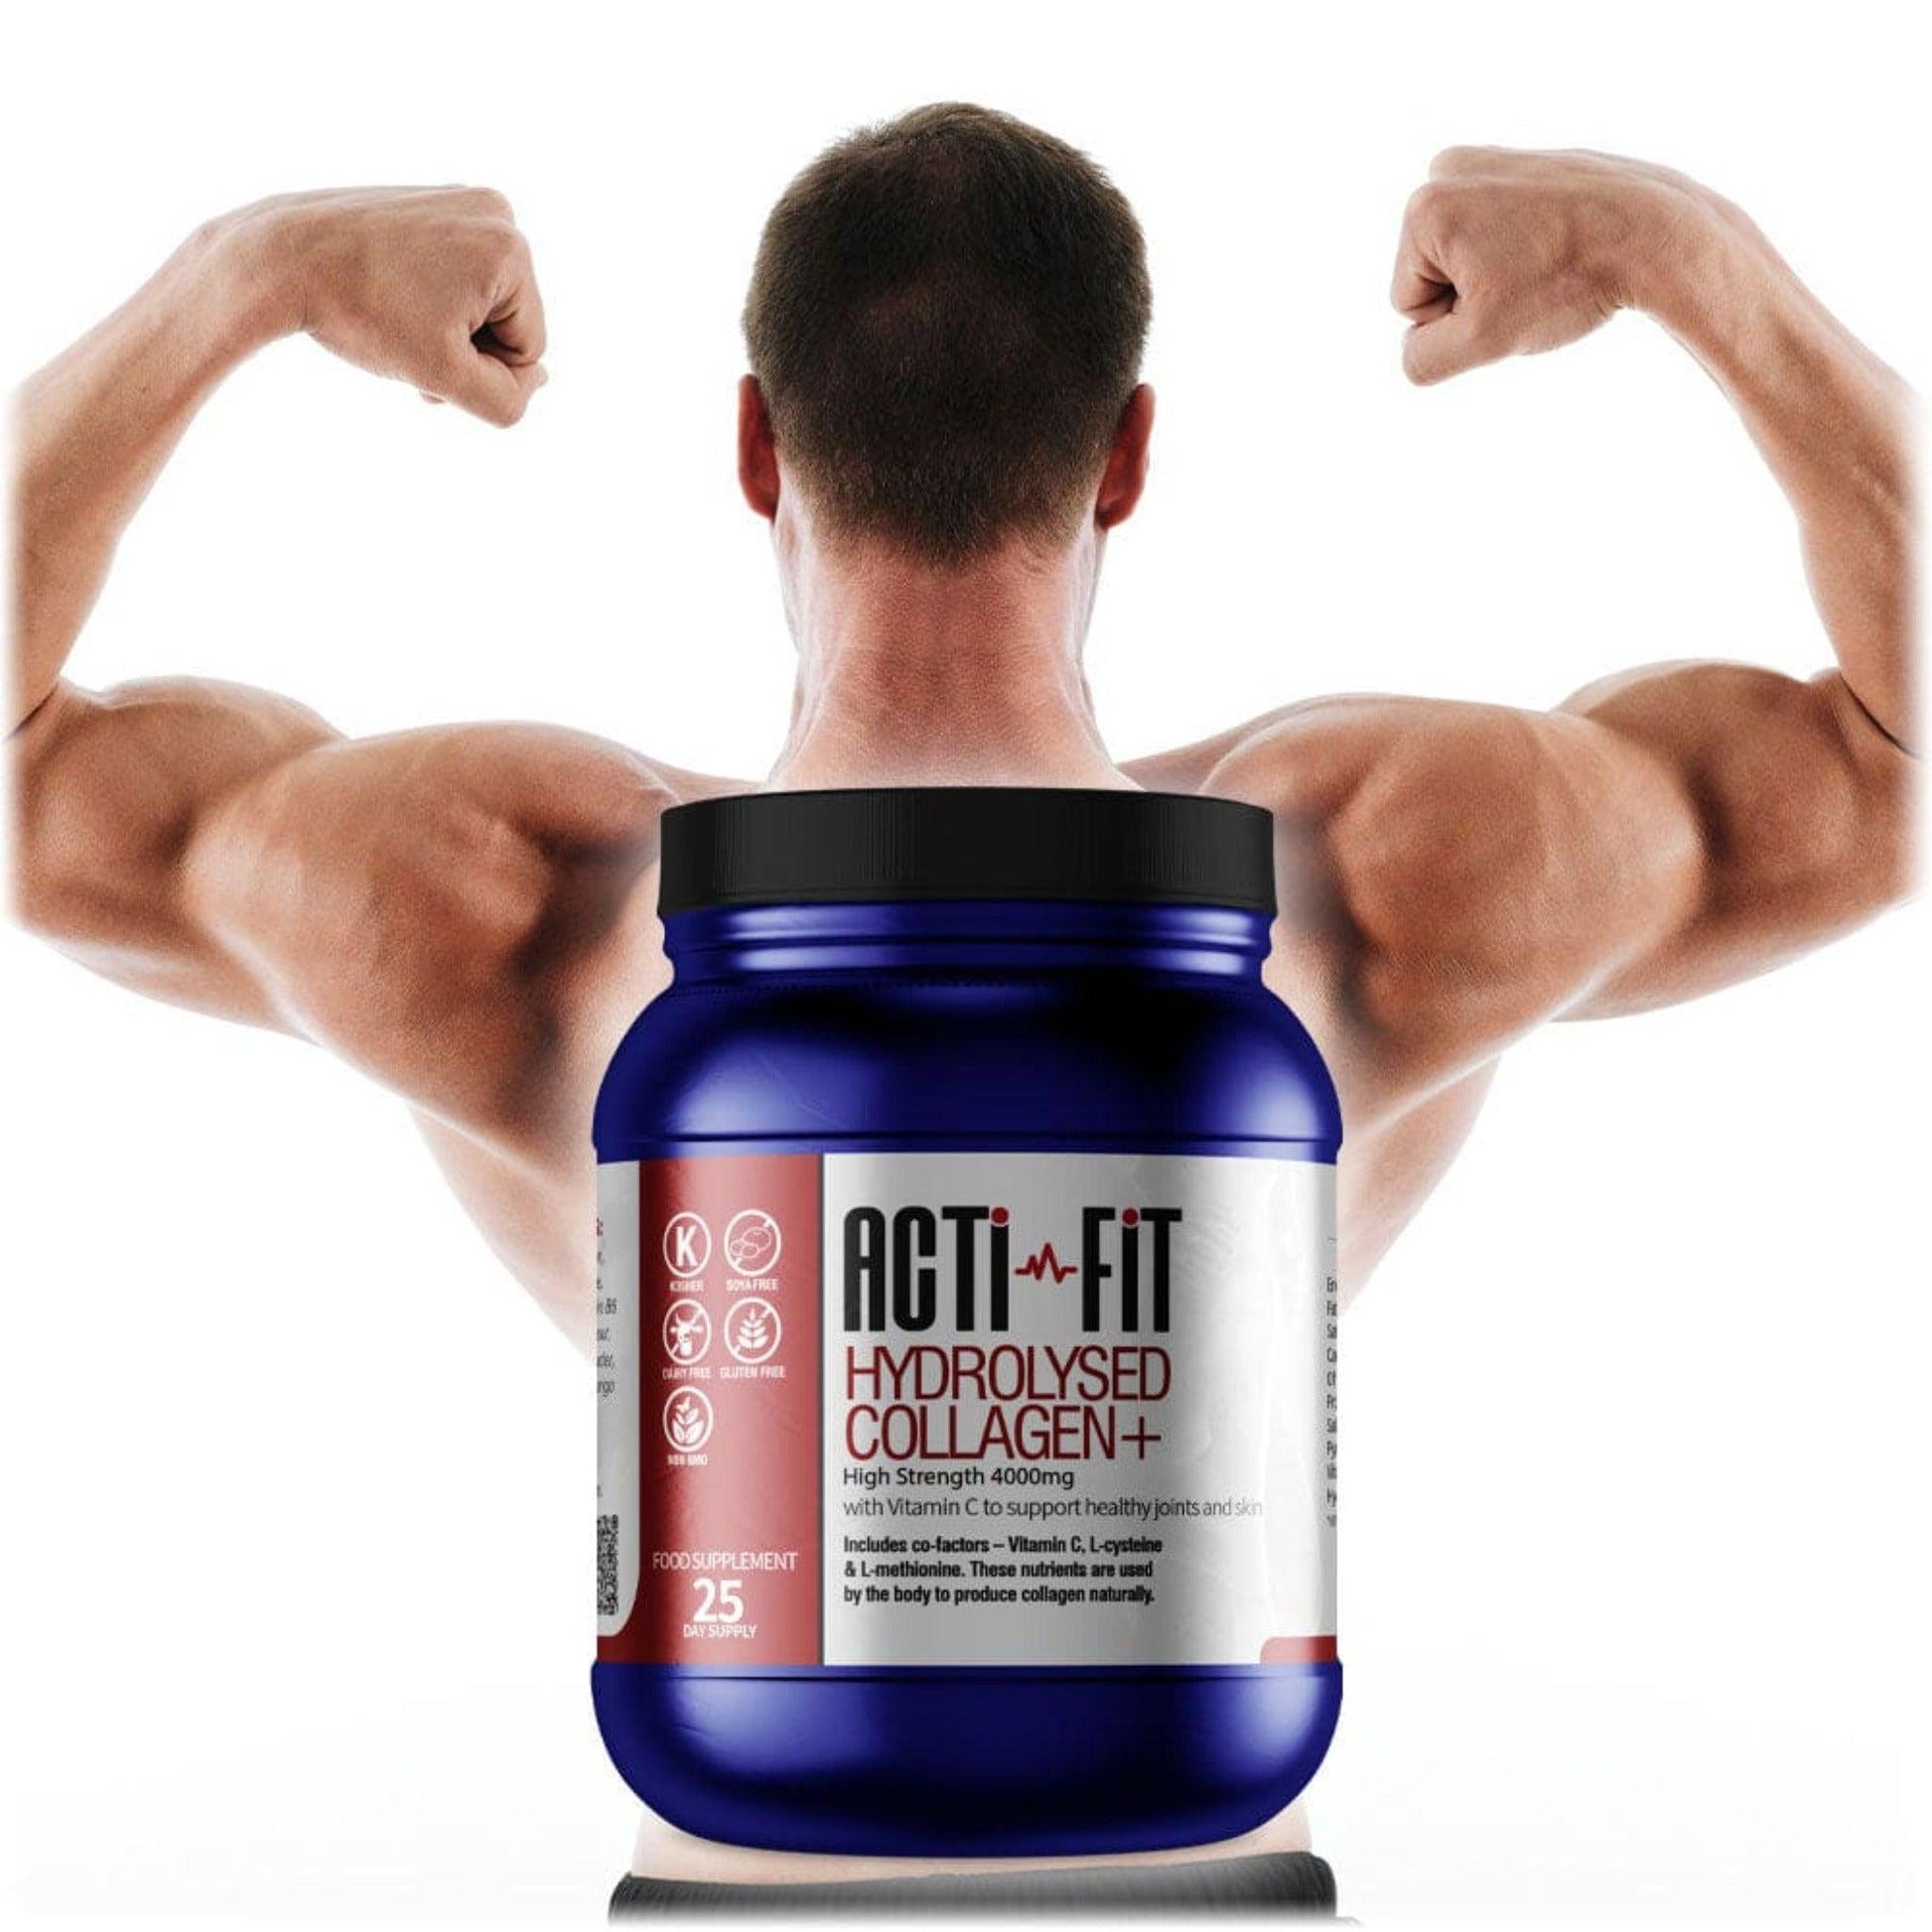 A man flexing his biceps and back muscles with a tub of Acti-Fit Hydrolysed Collagen 4000mg High Strength in the foreground